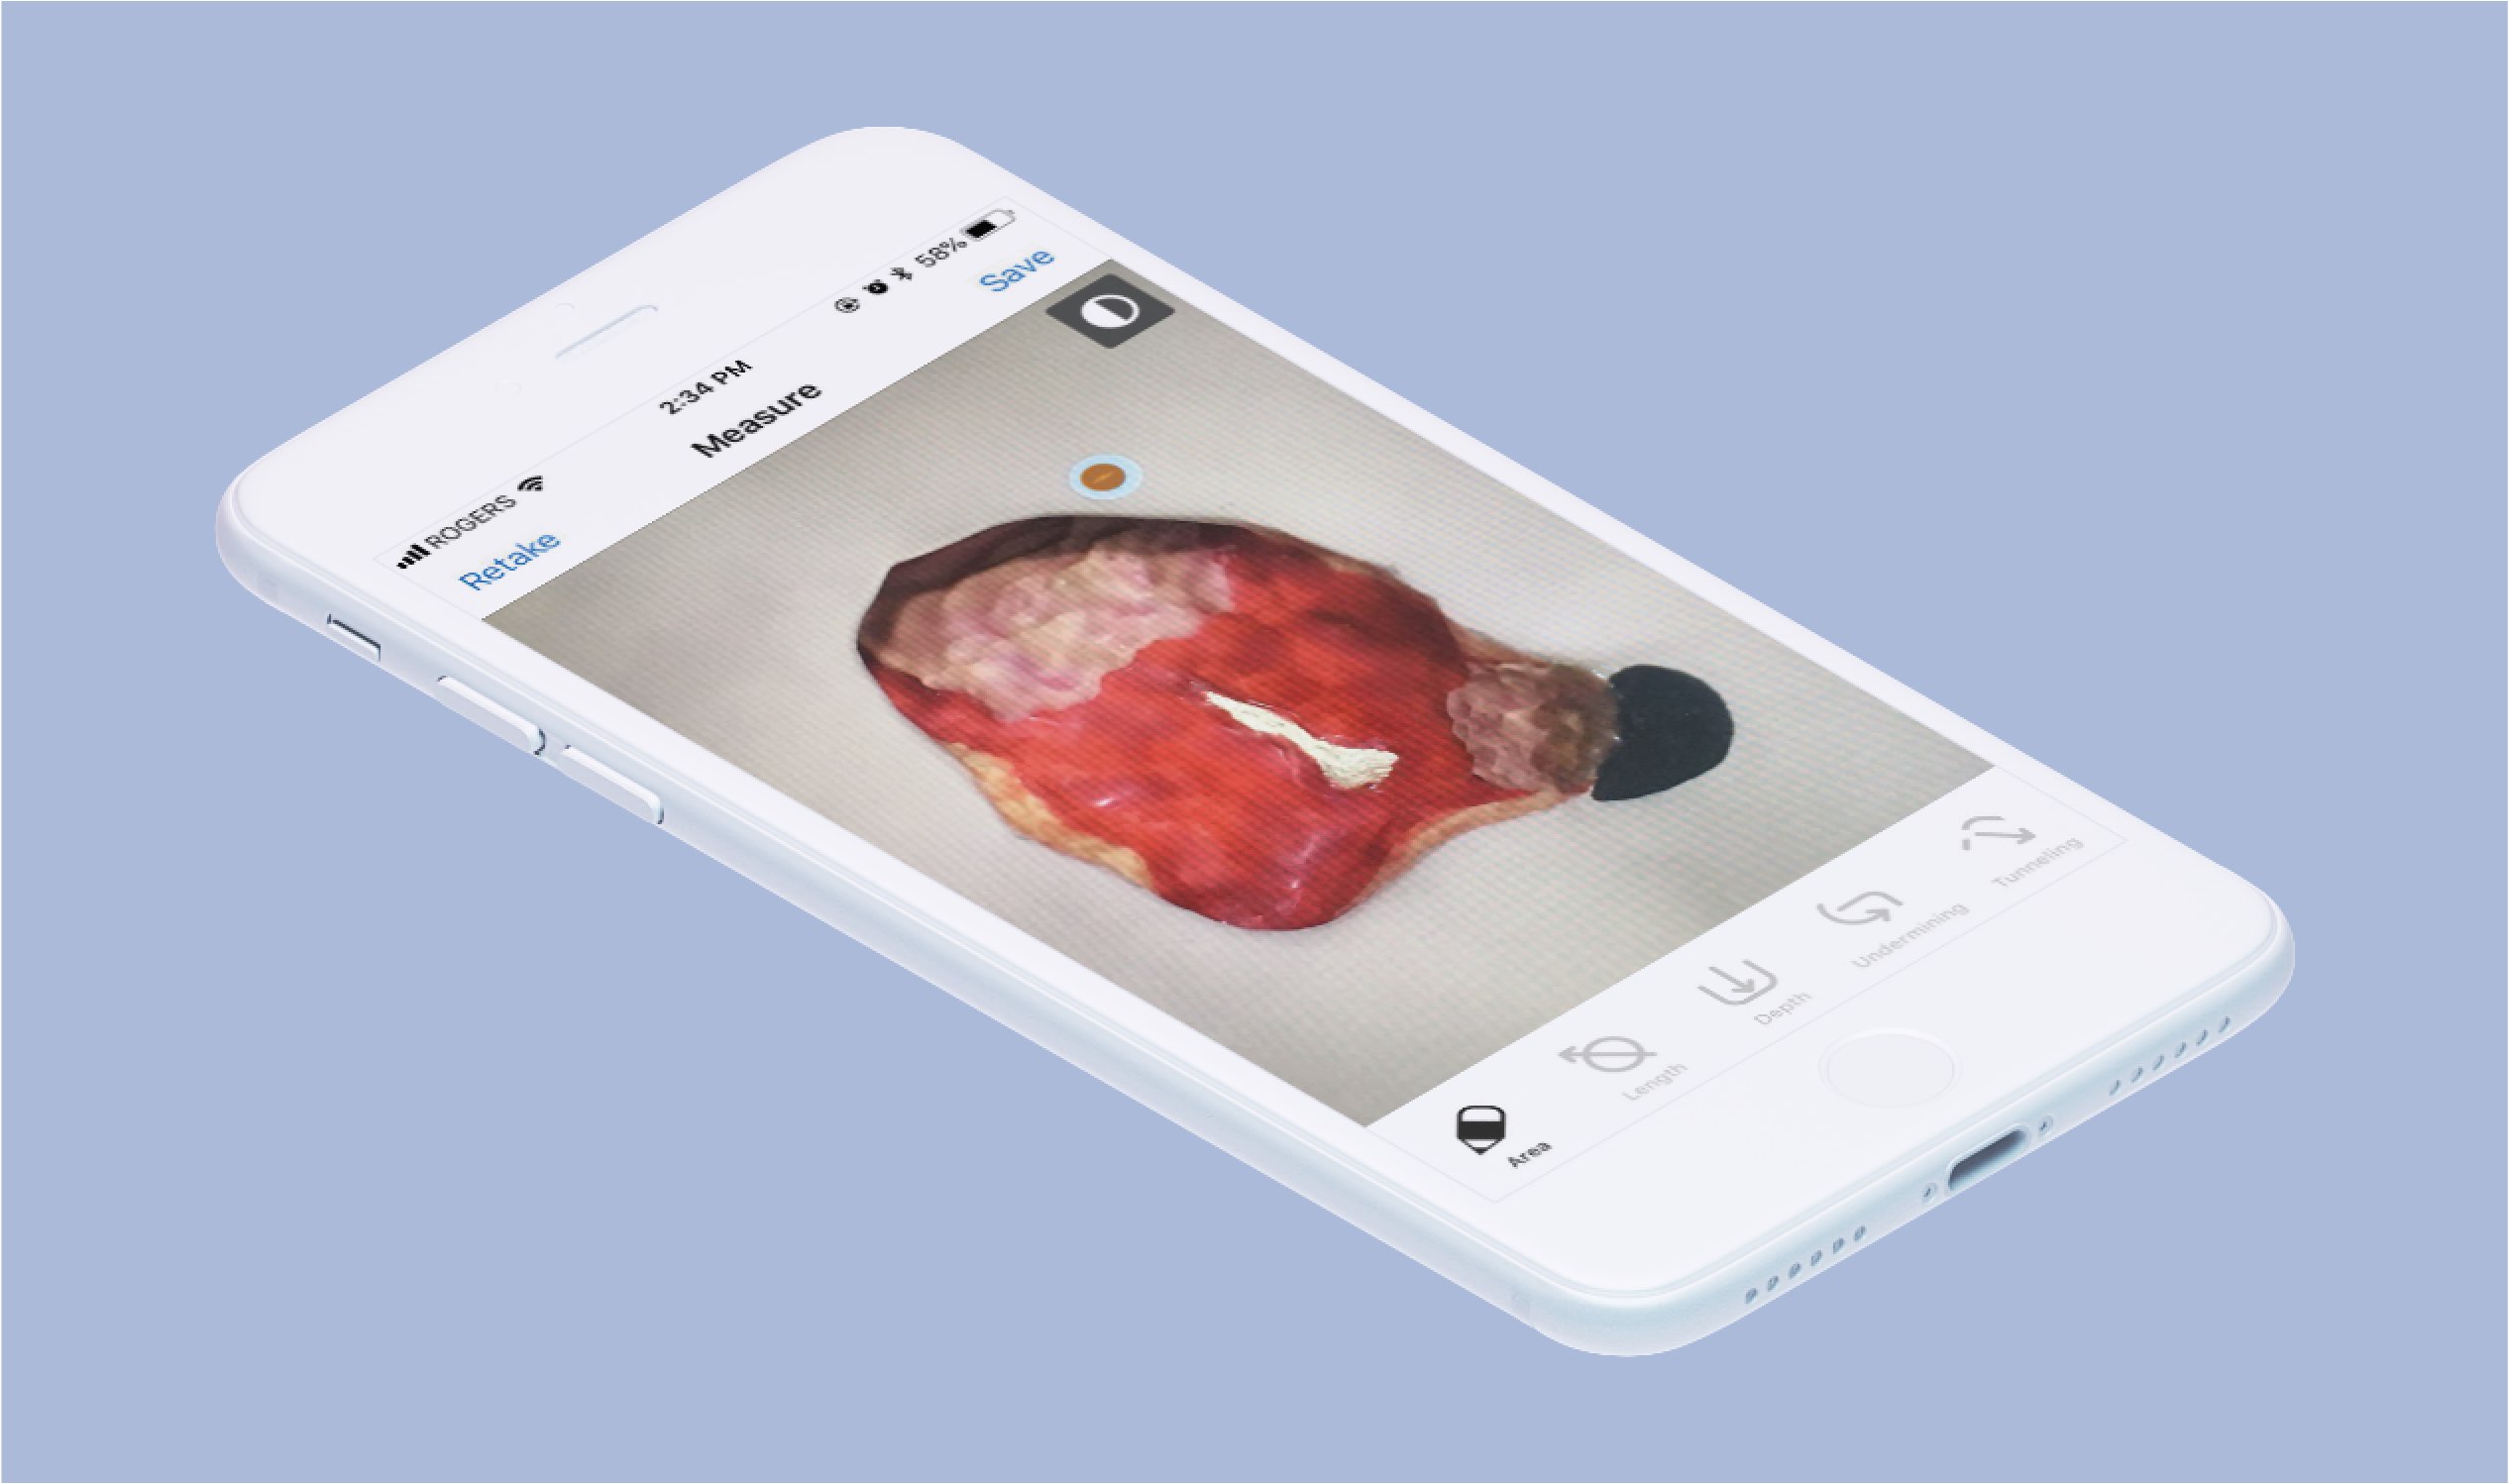 smartphone with screenshot of camera view of patient wound